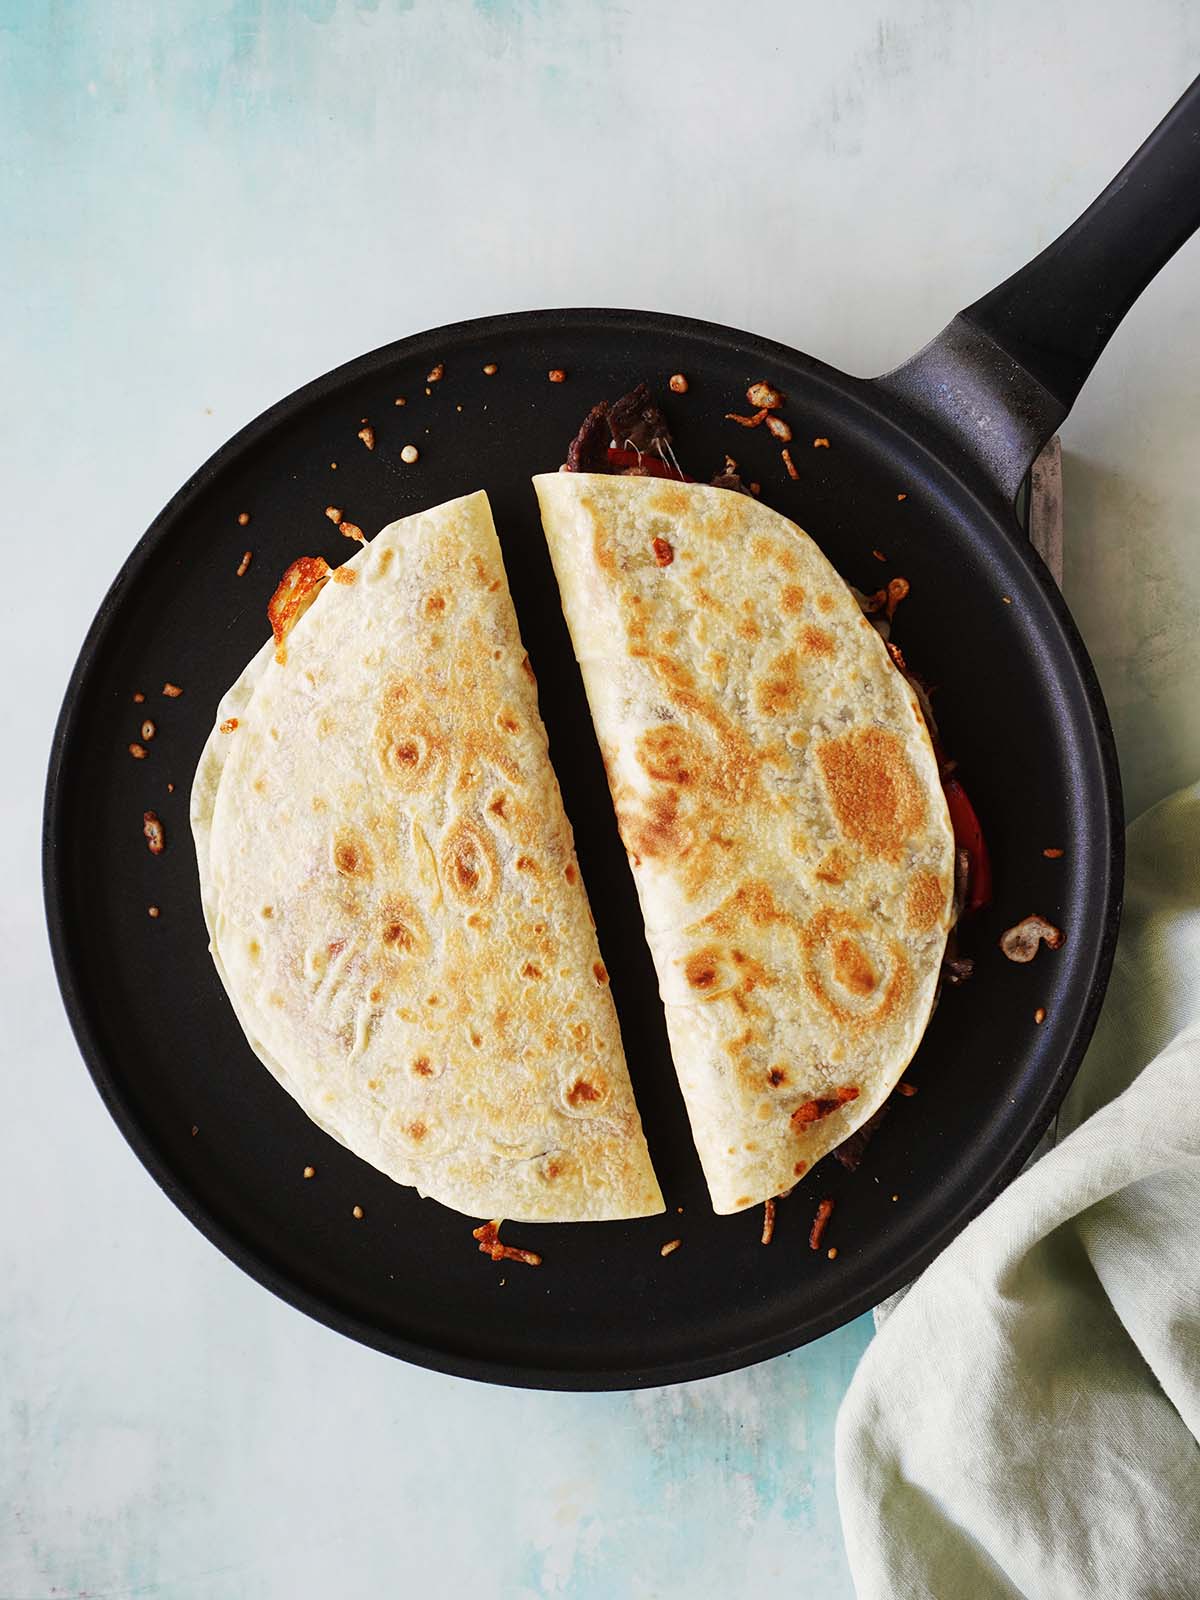 Two crispy quesadillas on a skillet next to each other.